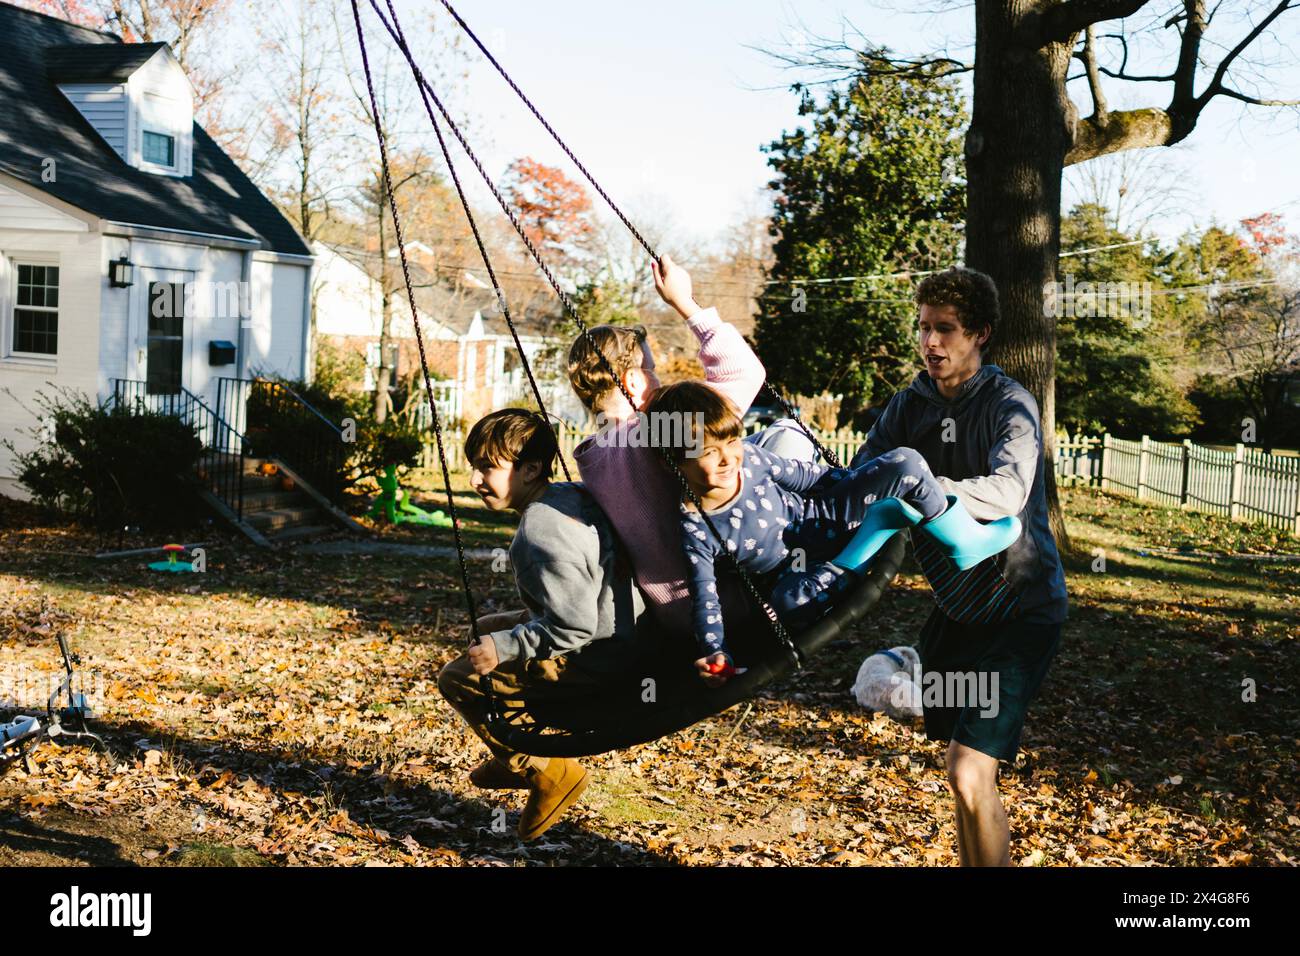 Teenager pushes younger cousins on tree swing in front yard Stock Photo